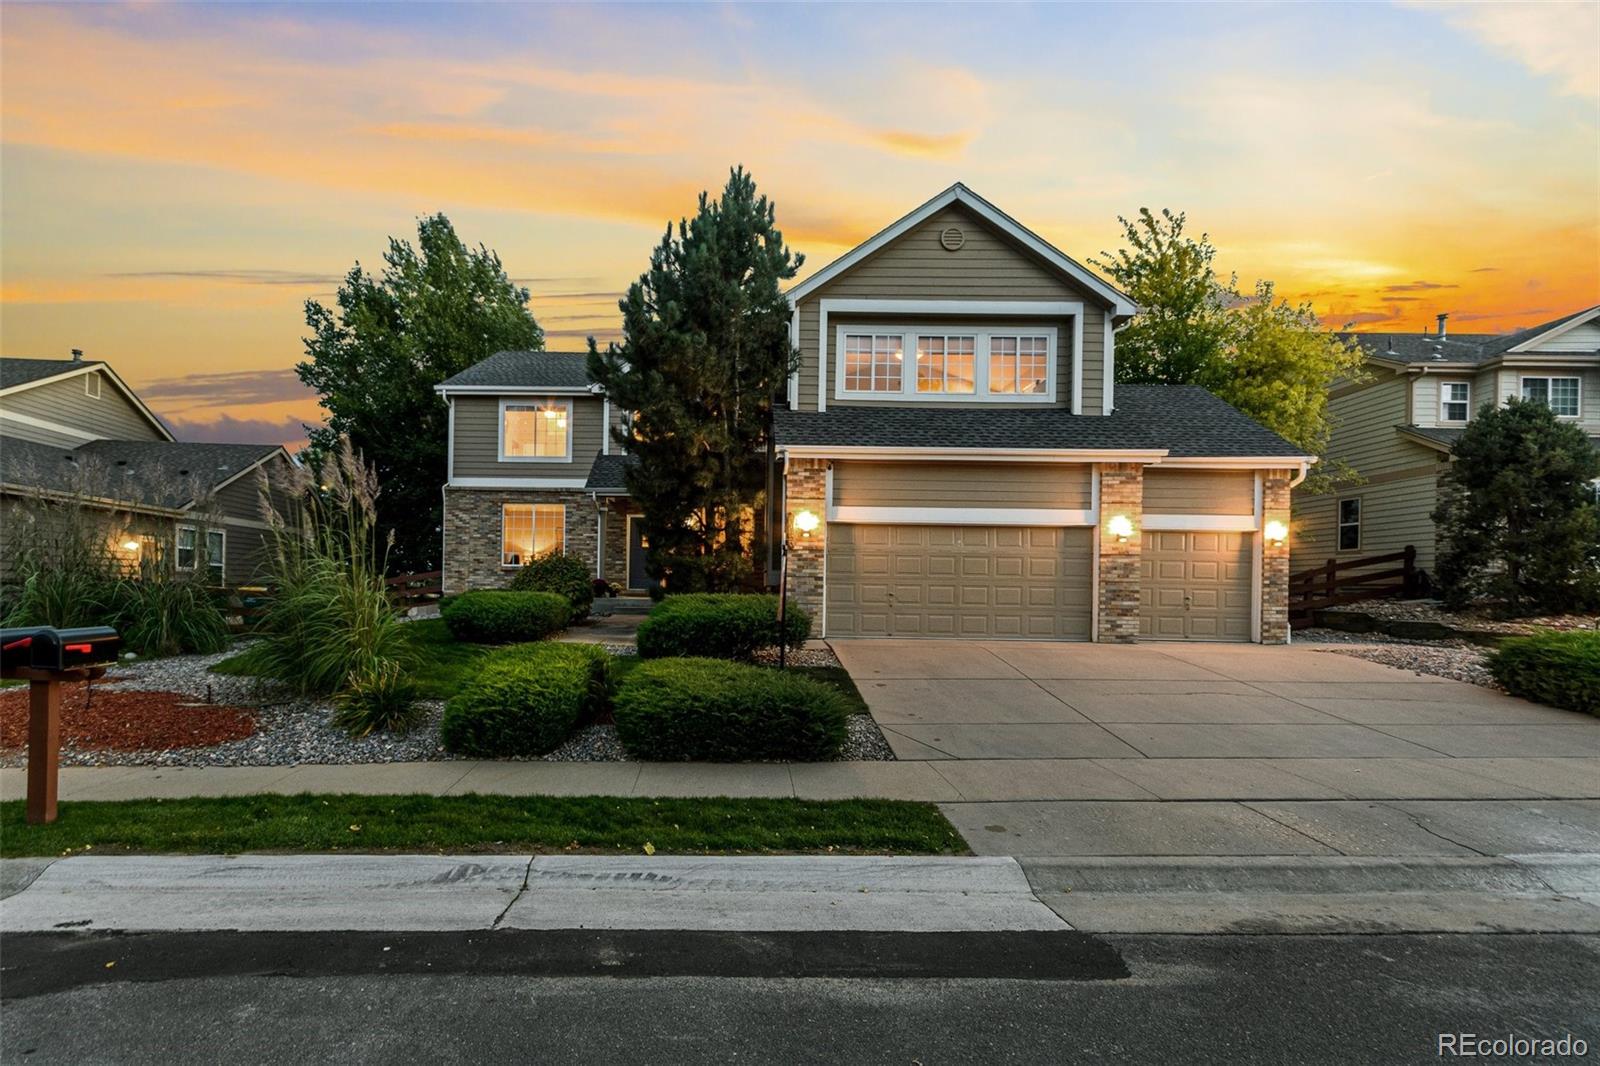 16720 W 60th Drive, arvada MLS: 3456857 Beds: 4 Baths: 4 Price: $1,075,000